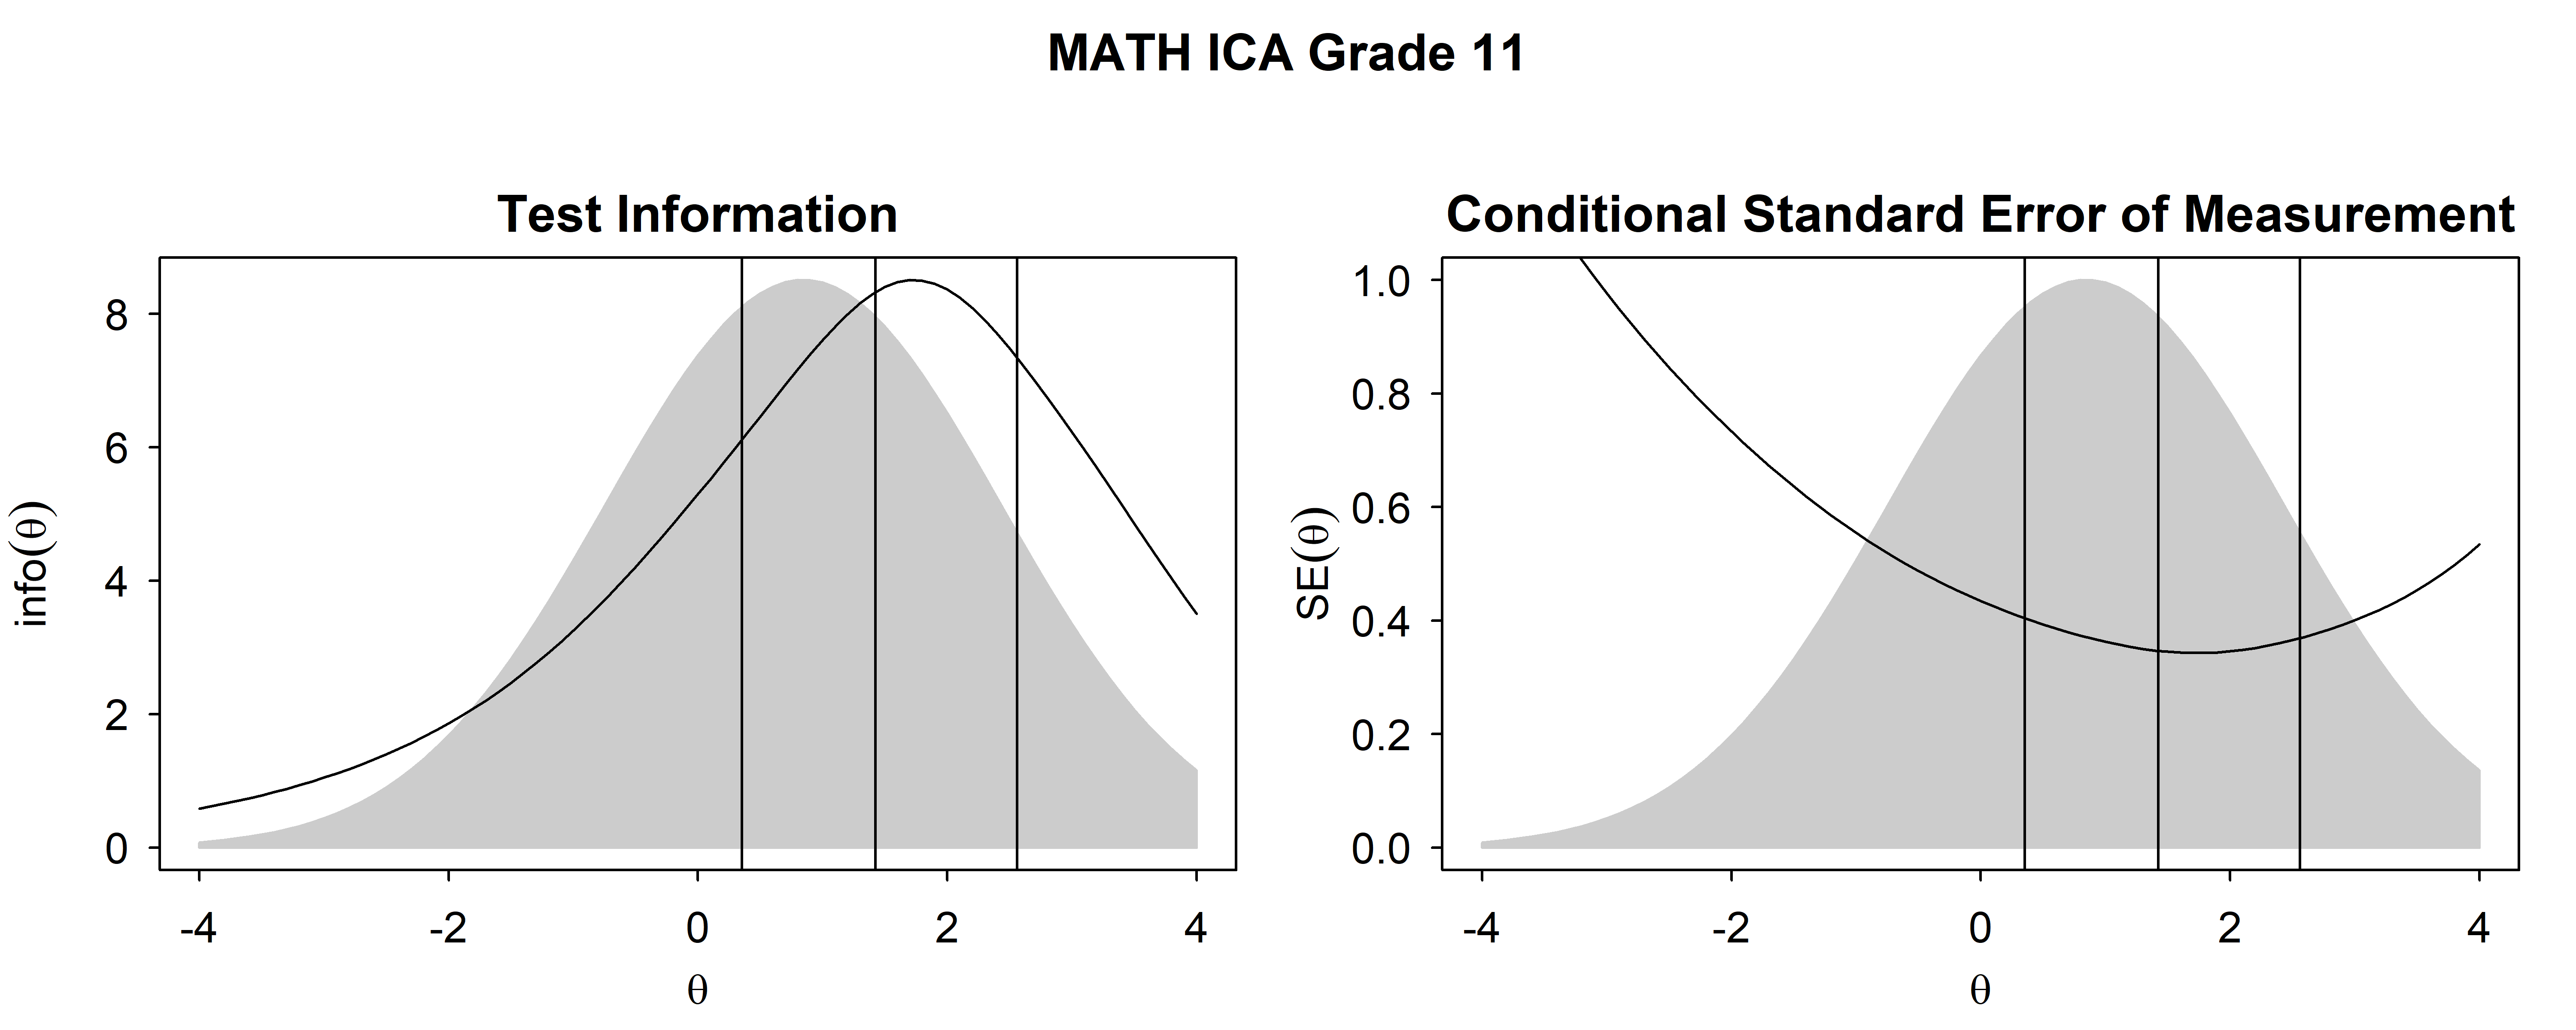 Test Information Functions and SEM For Mathematics ICA, High School